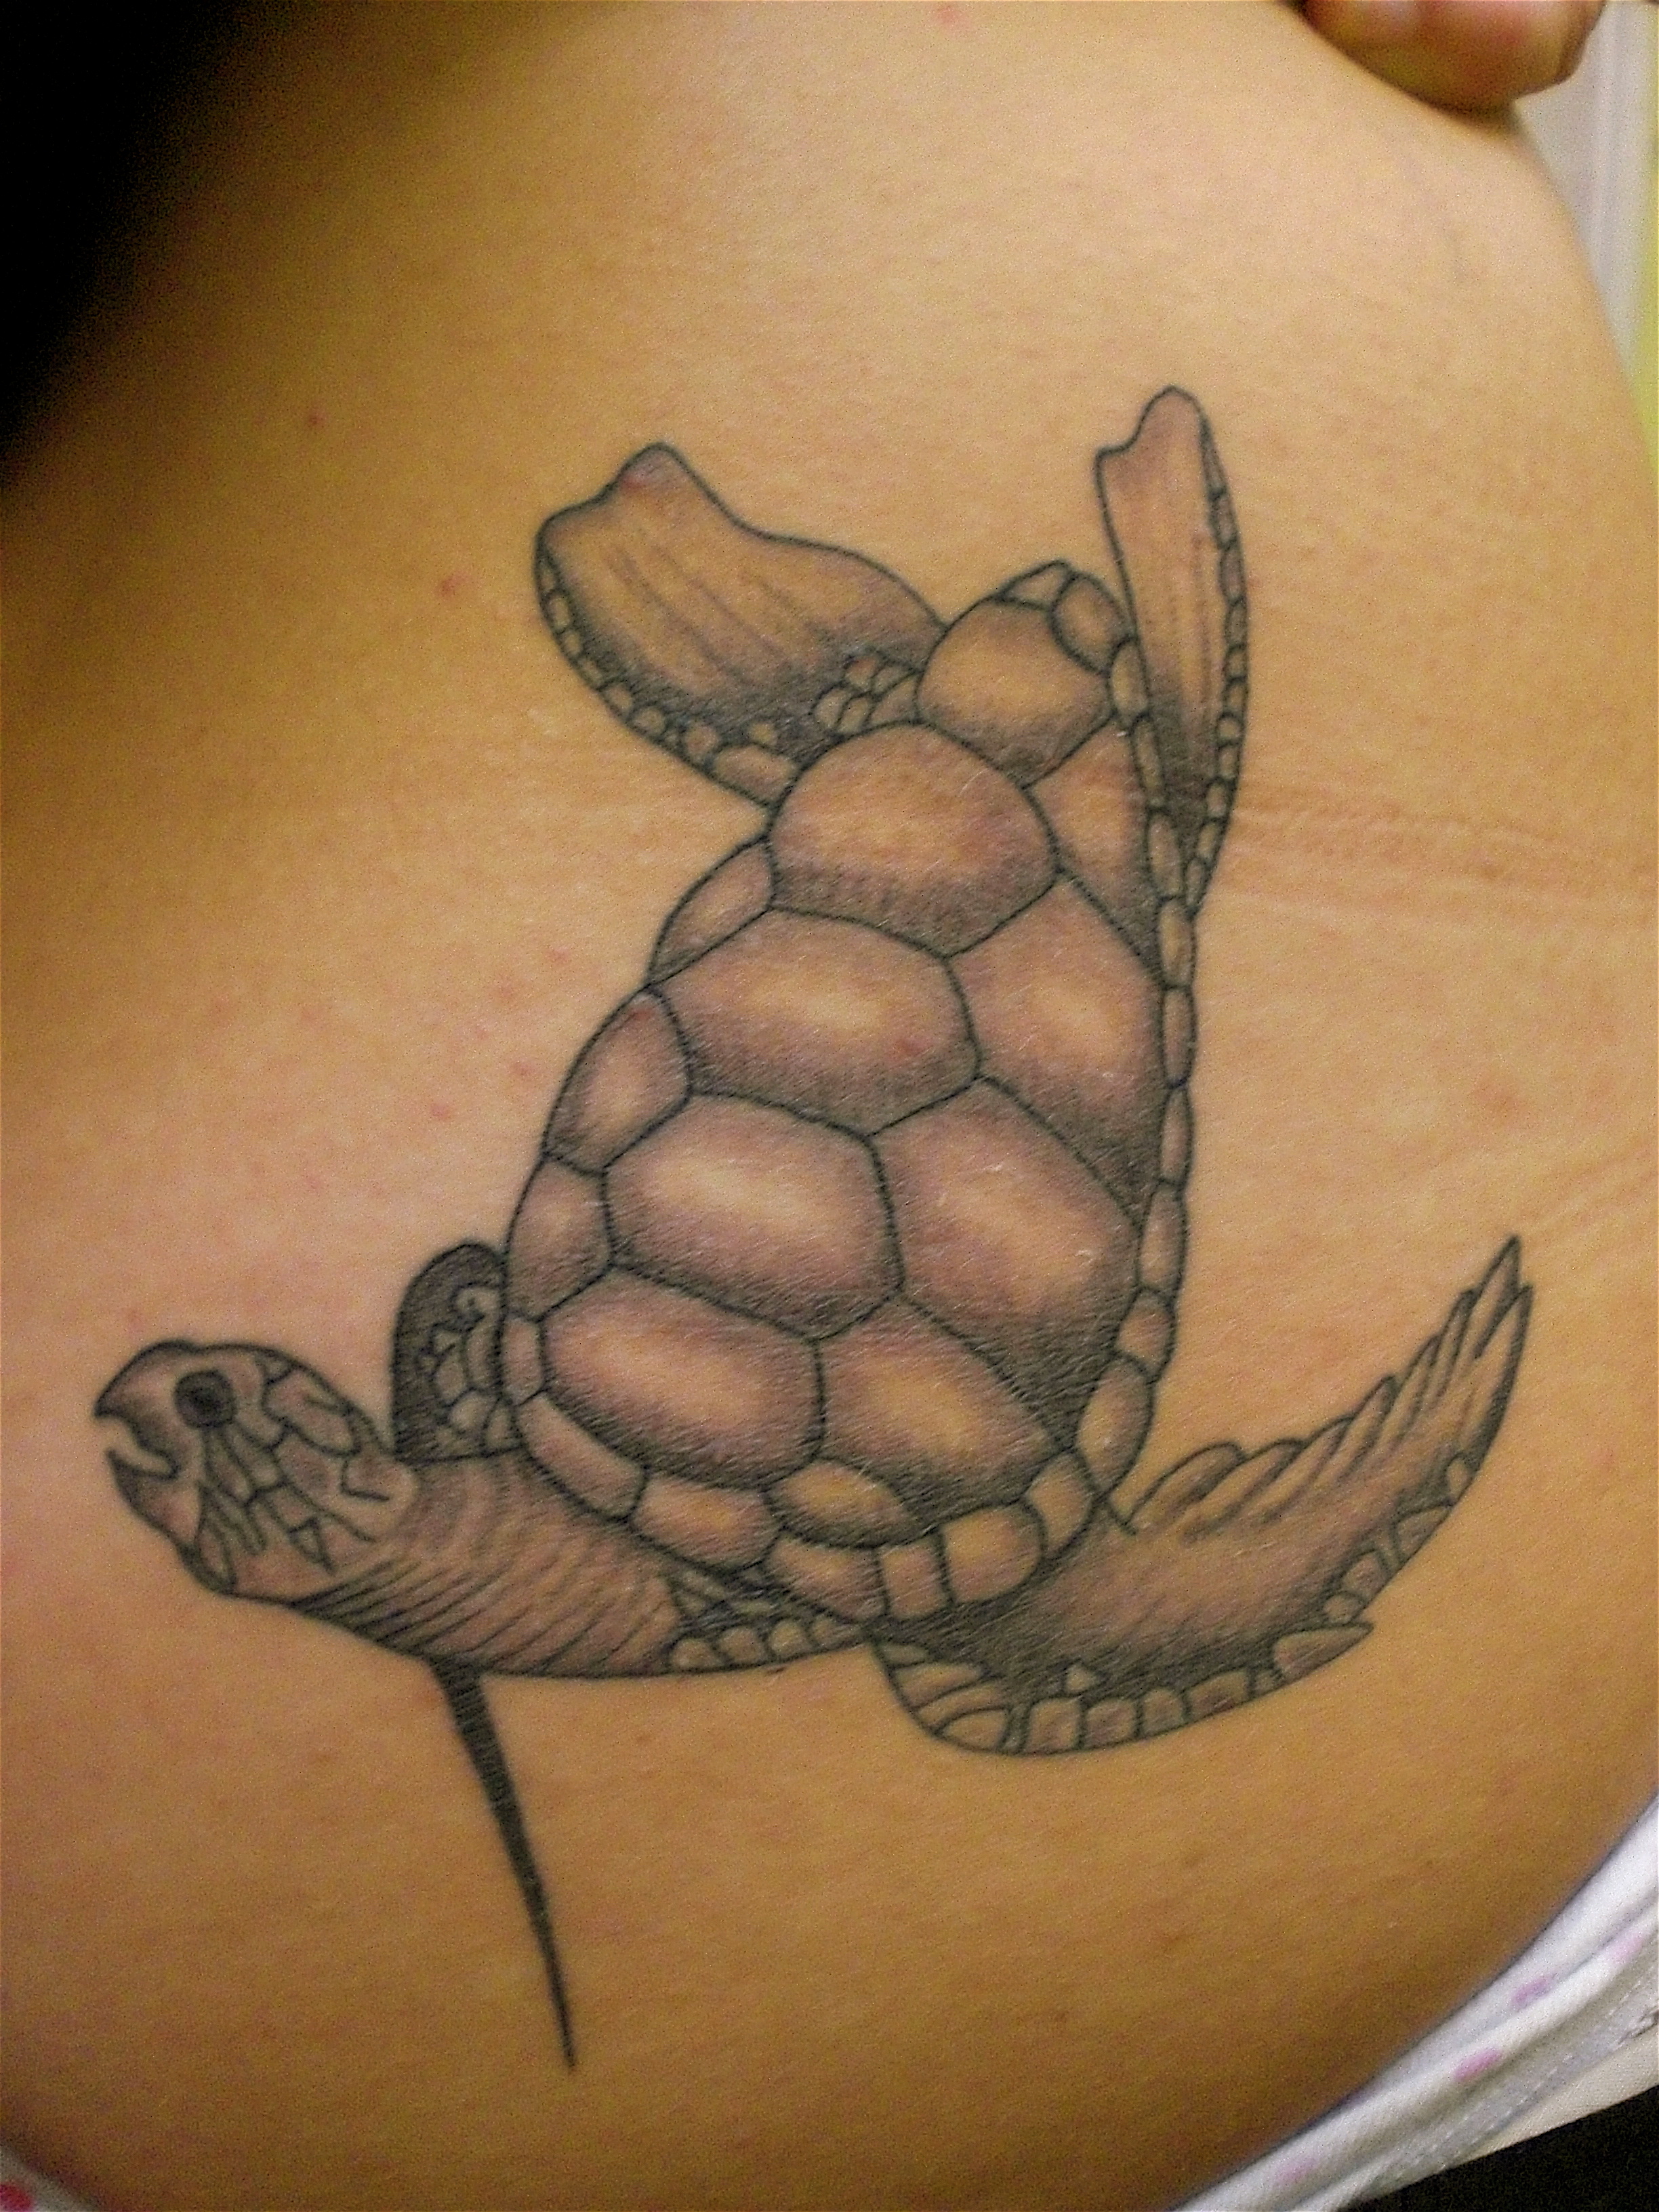 Turtle Tattoos Designs, Ideas and Meaning | Tattoos For You